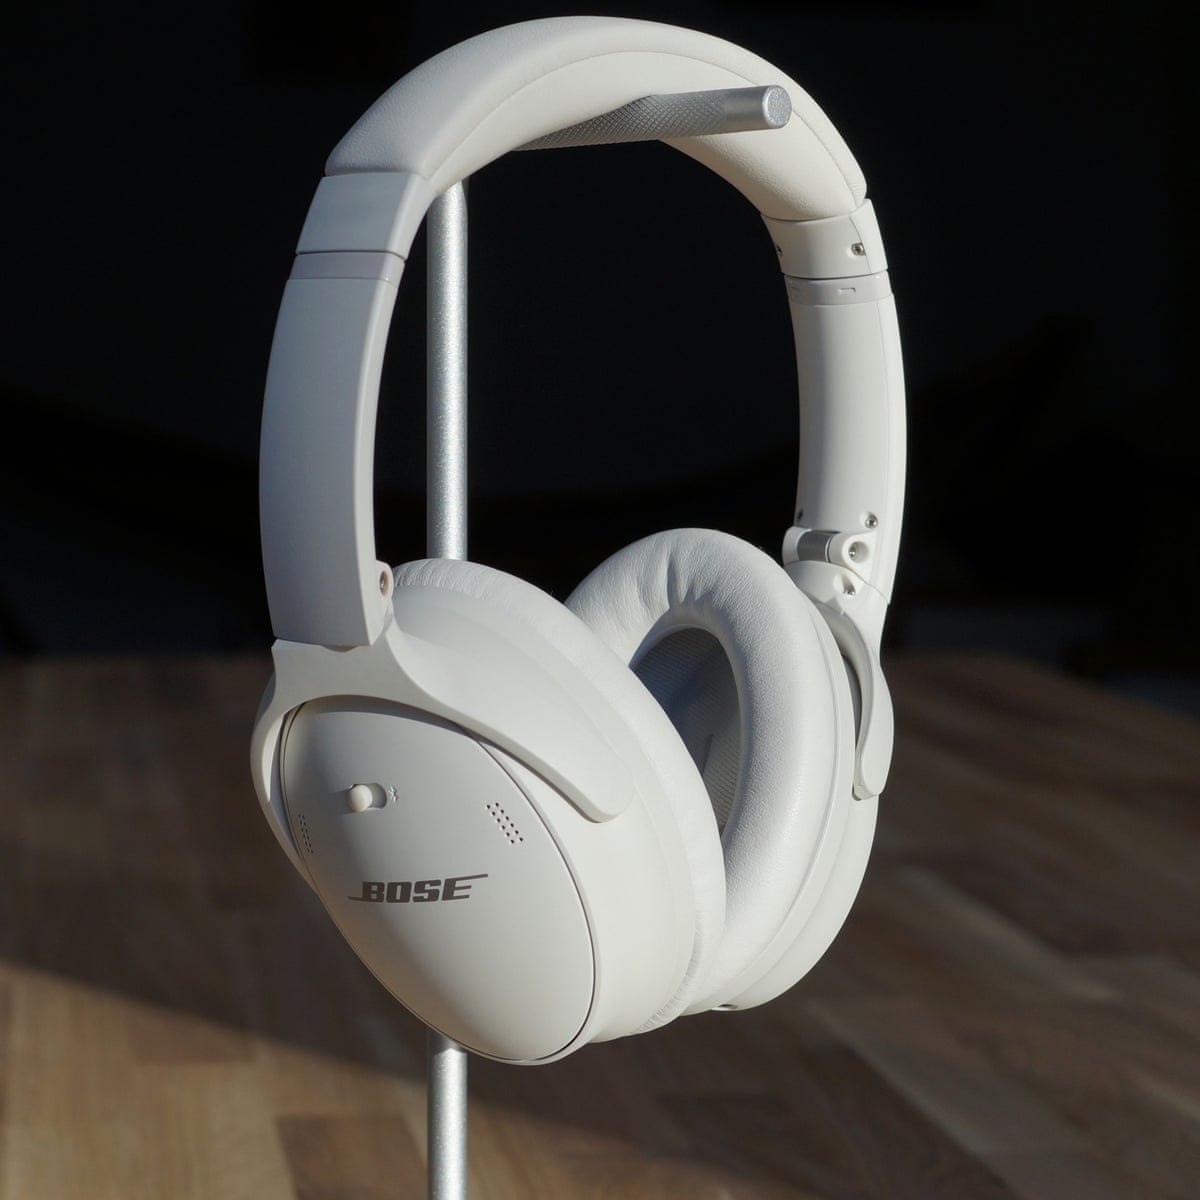 Bose commuter favourite noise-cancelling headphones revamped | Headphones | The Guardian